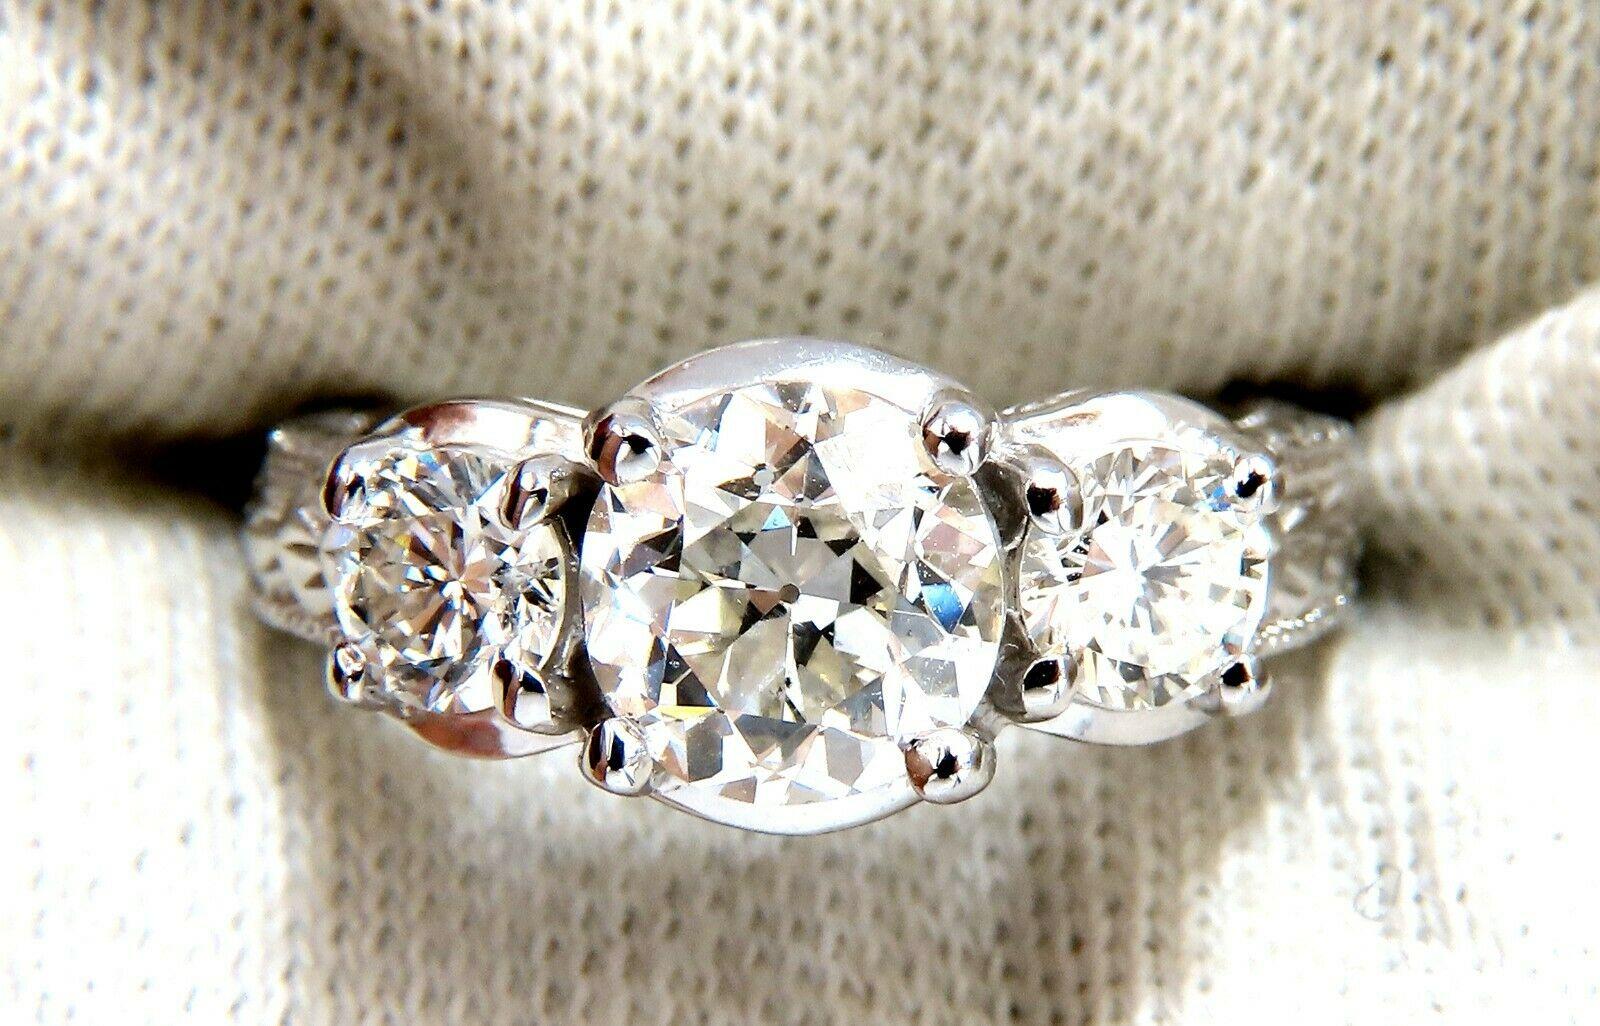 Classic Three Engagement ring

1.70ct. Natural Center Round Brilliant diamond.

Old mine, European Cut

I-color Si-1 clarity 

7.4 x 7.3mm

 

With .77ct (2) Side round diamonds.

I-color si-2 clarity.

14kt white gold

Ring Current size: 6.25

5.6